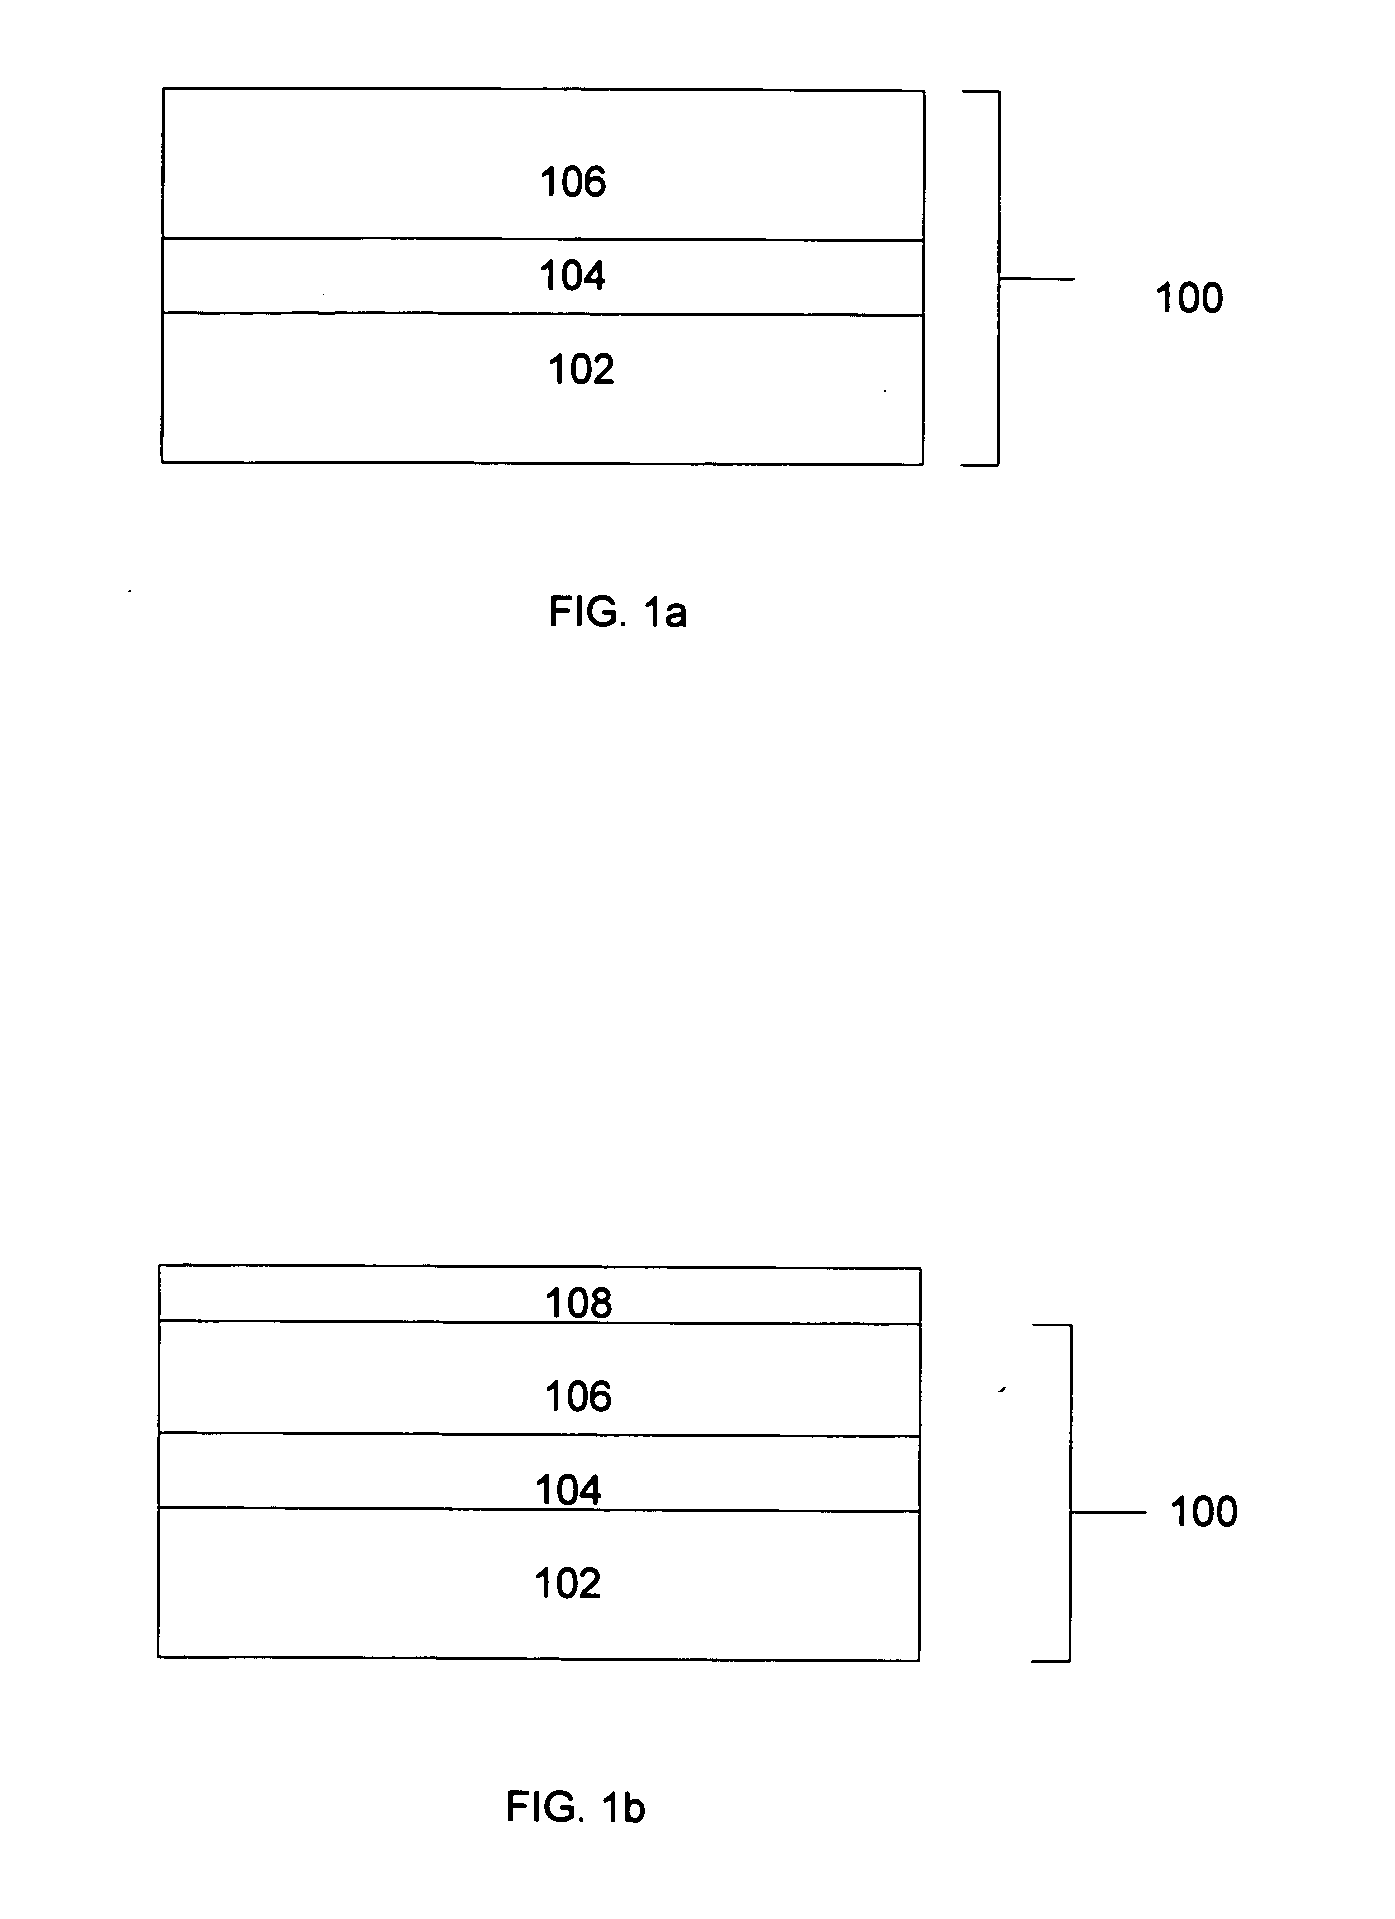 Methods of forming a high germanium concentration silicon germanium alloy by epitaxial lateral overgrowth and structures formed thereby